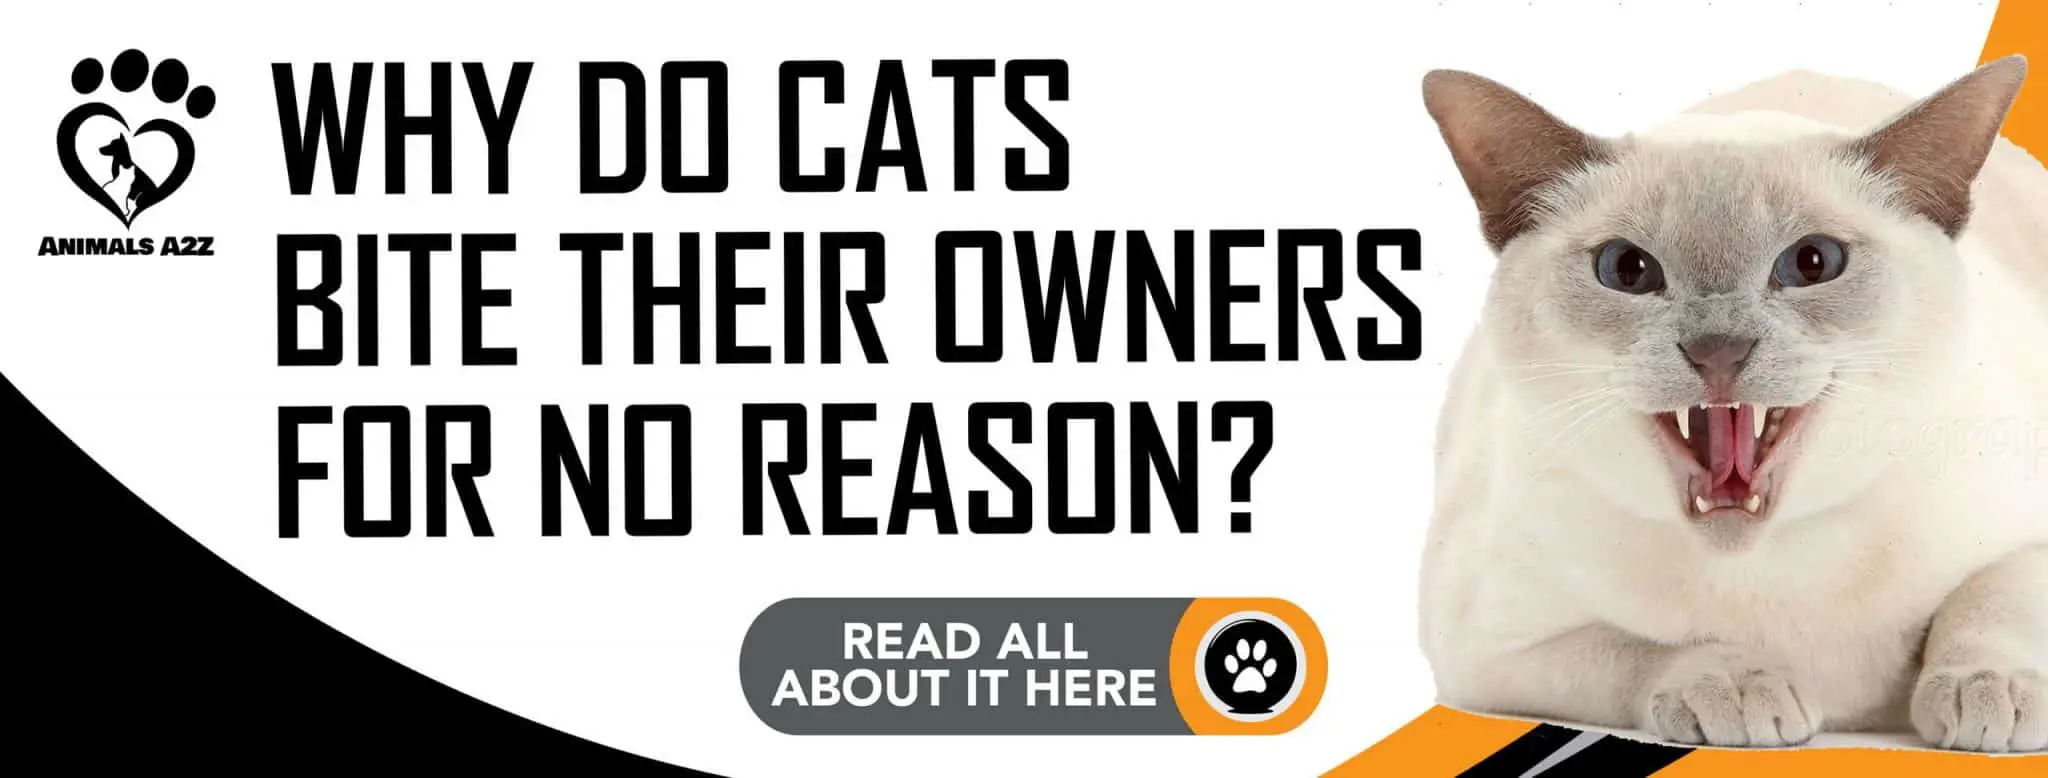 Why Do Cats Bite Their Owners For No Reason 1 1 Scaled 1 2048x778 